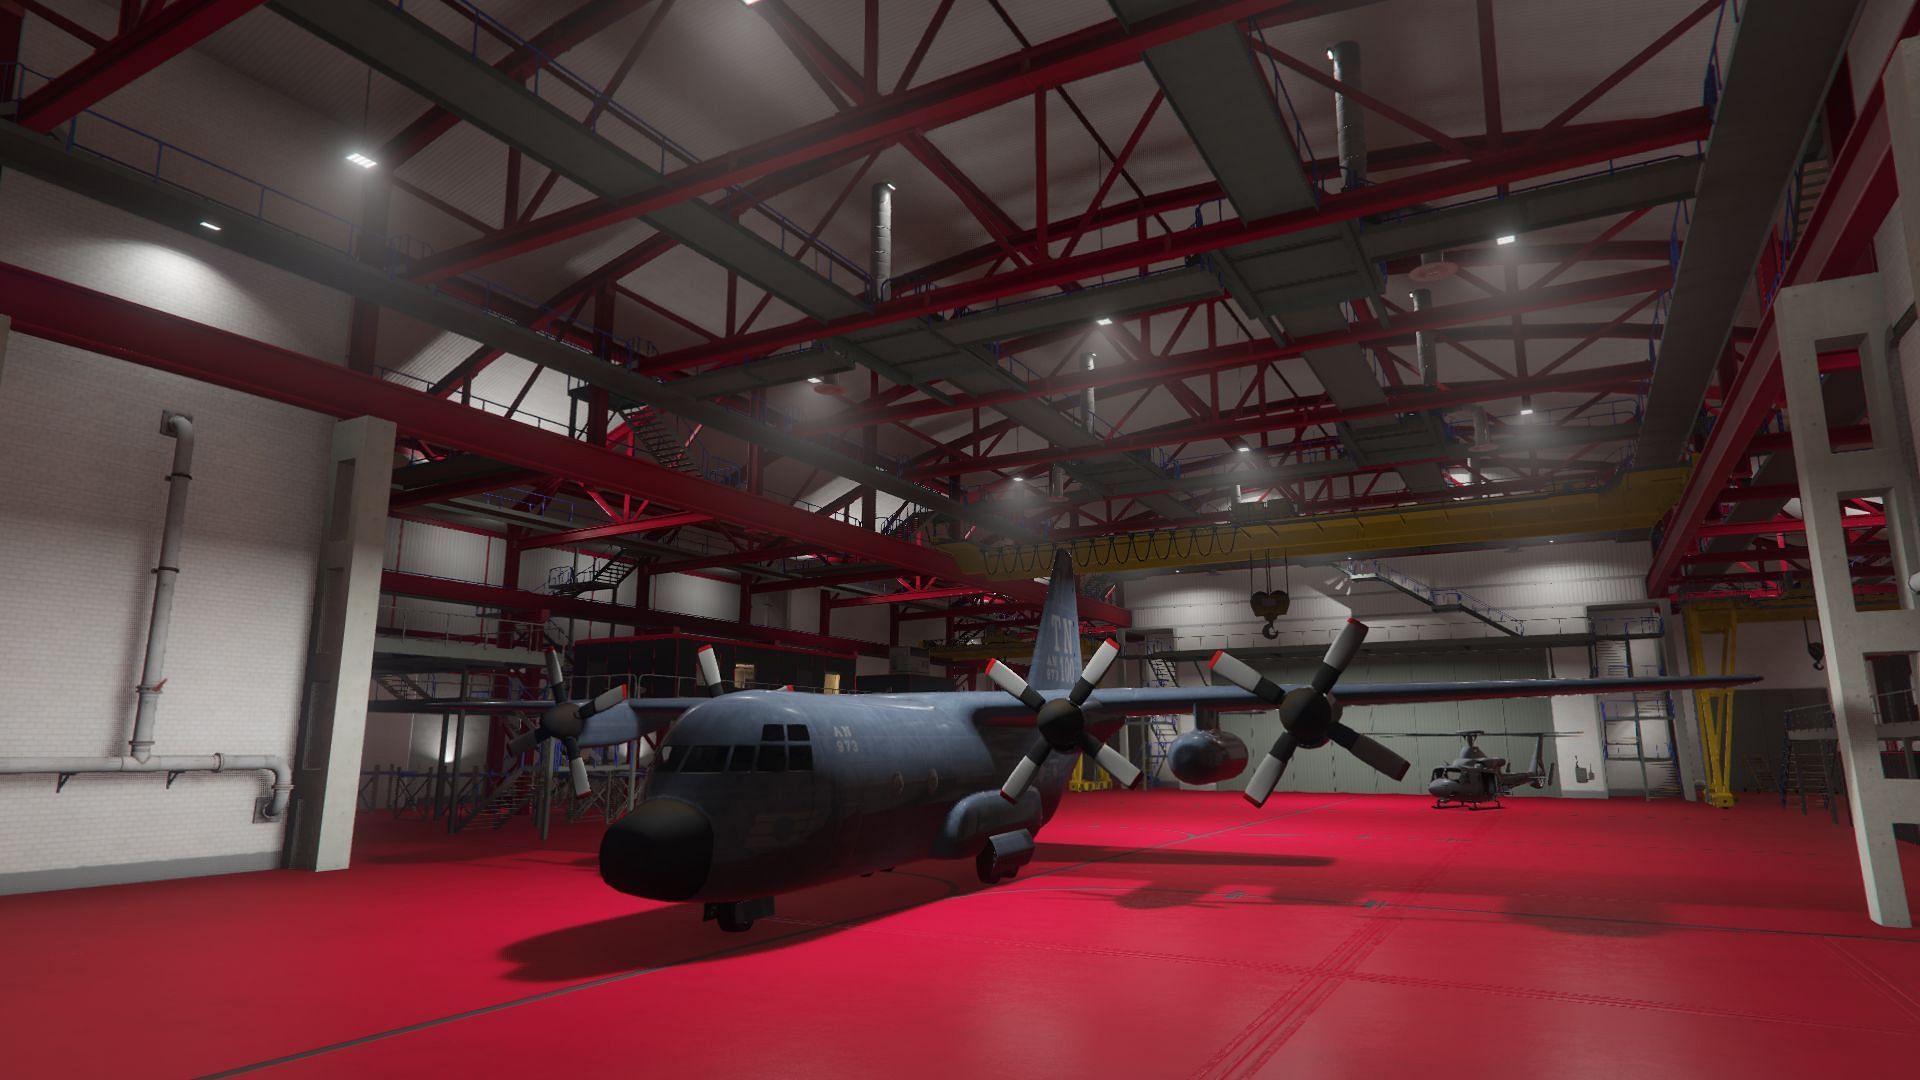 The interior of a Hangar in the game (Image via Rockstar Games)